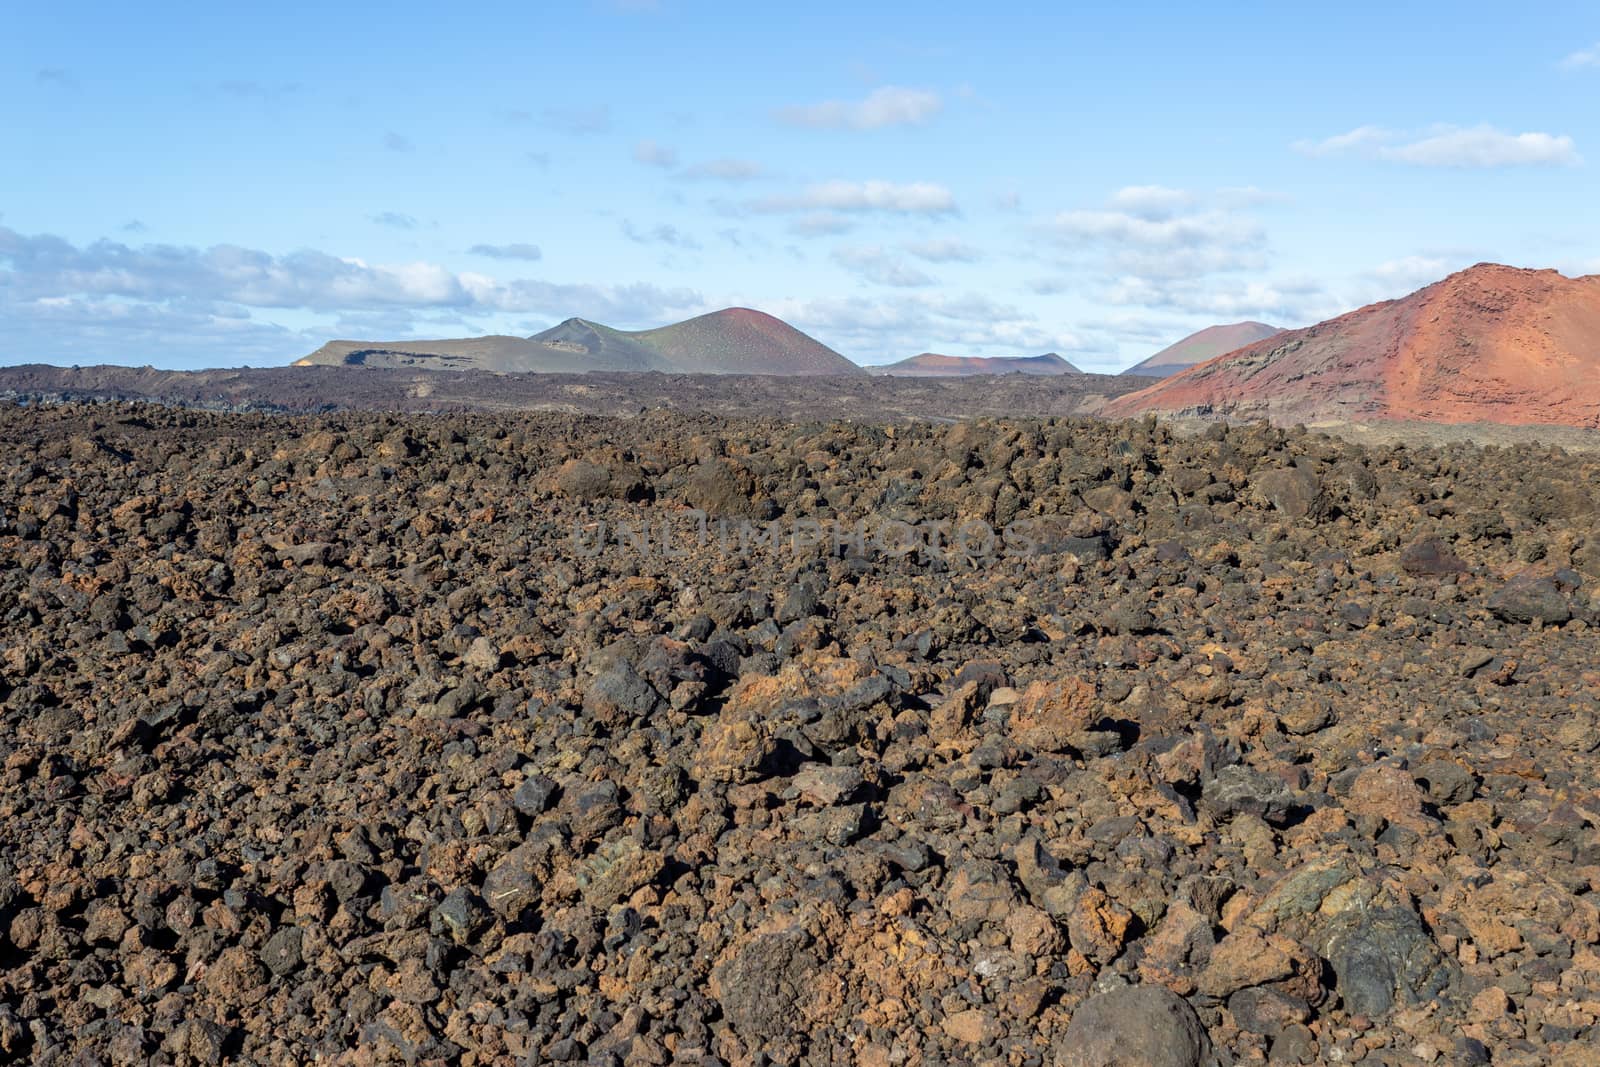 Volcanic landscape with lava field in the foreground and mountai by reinerc